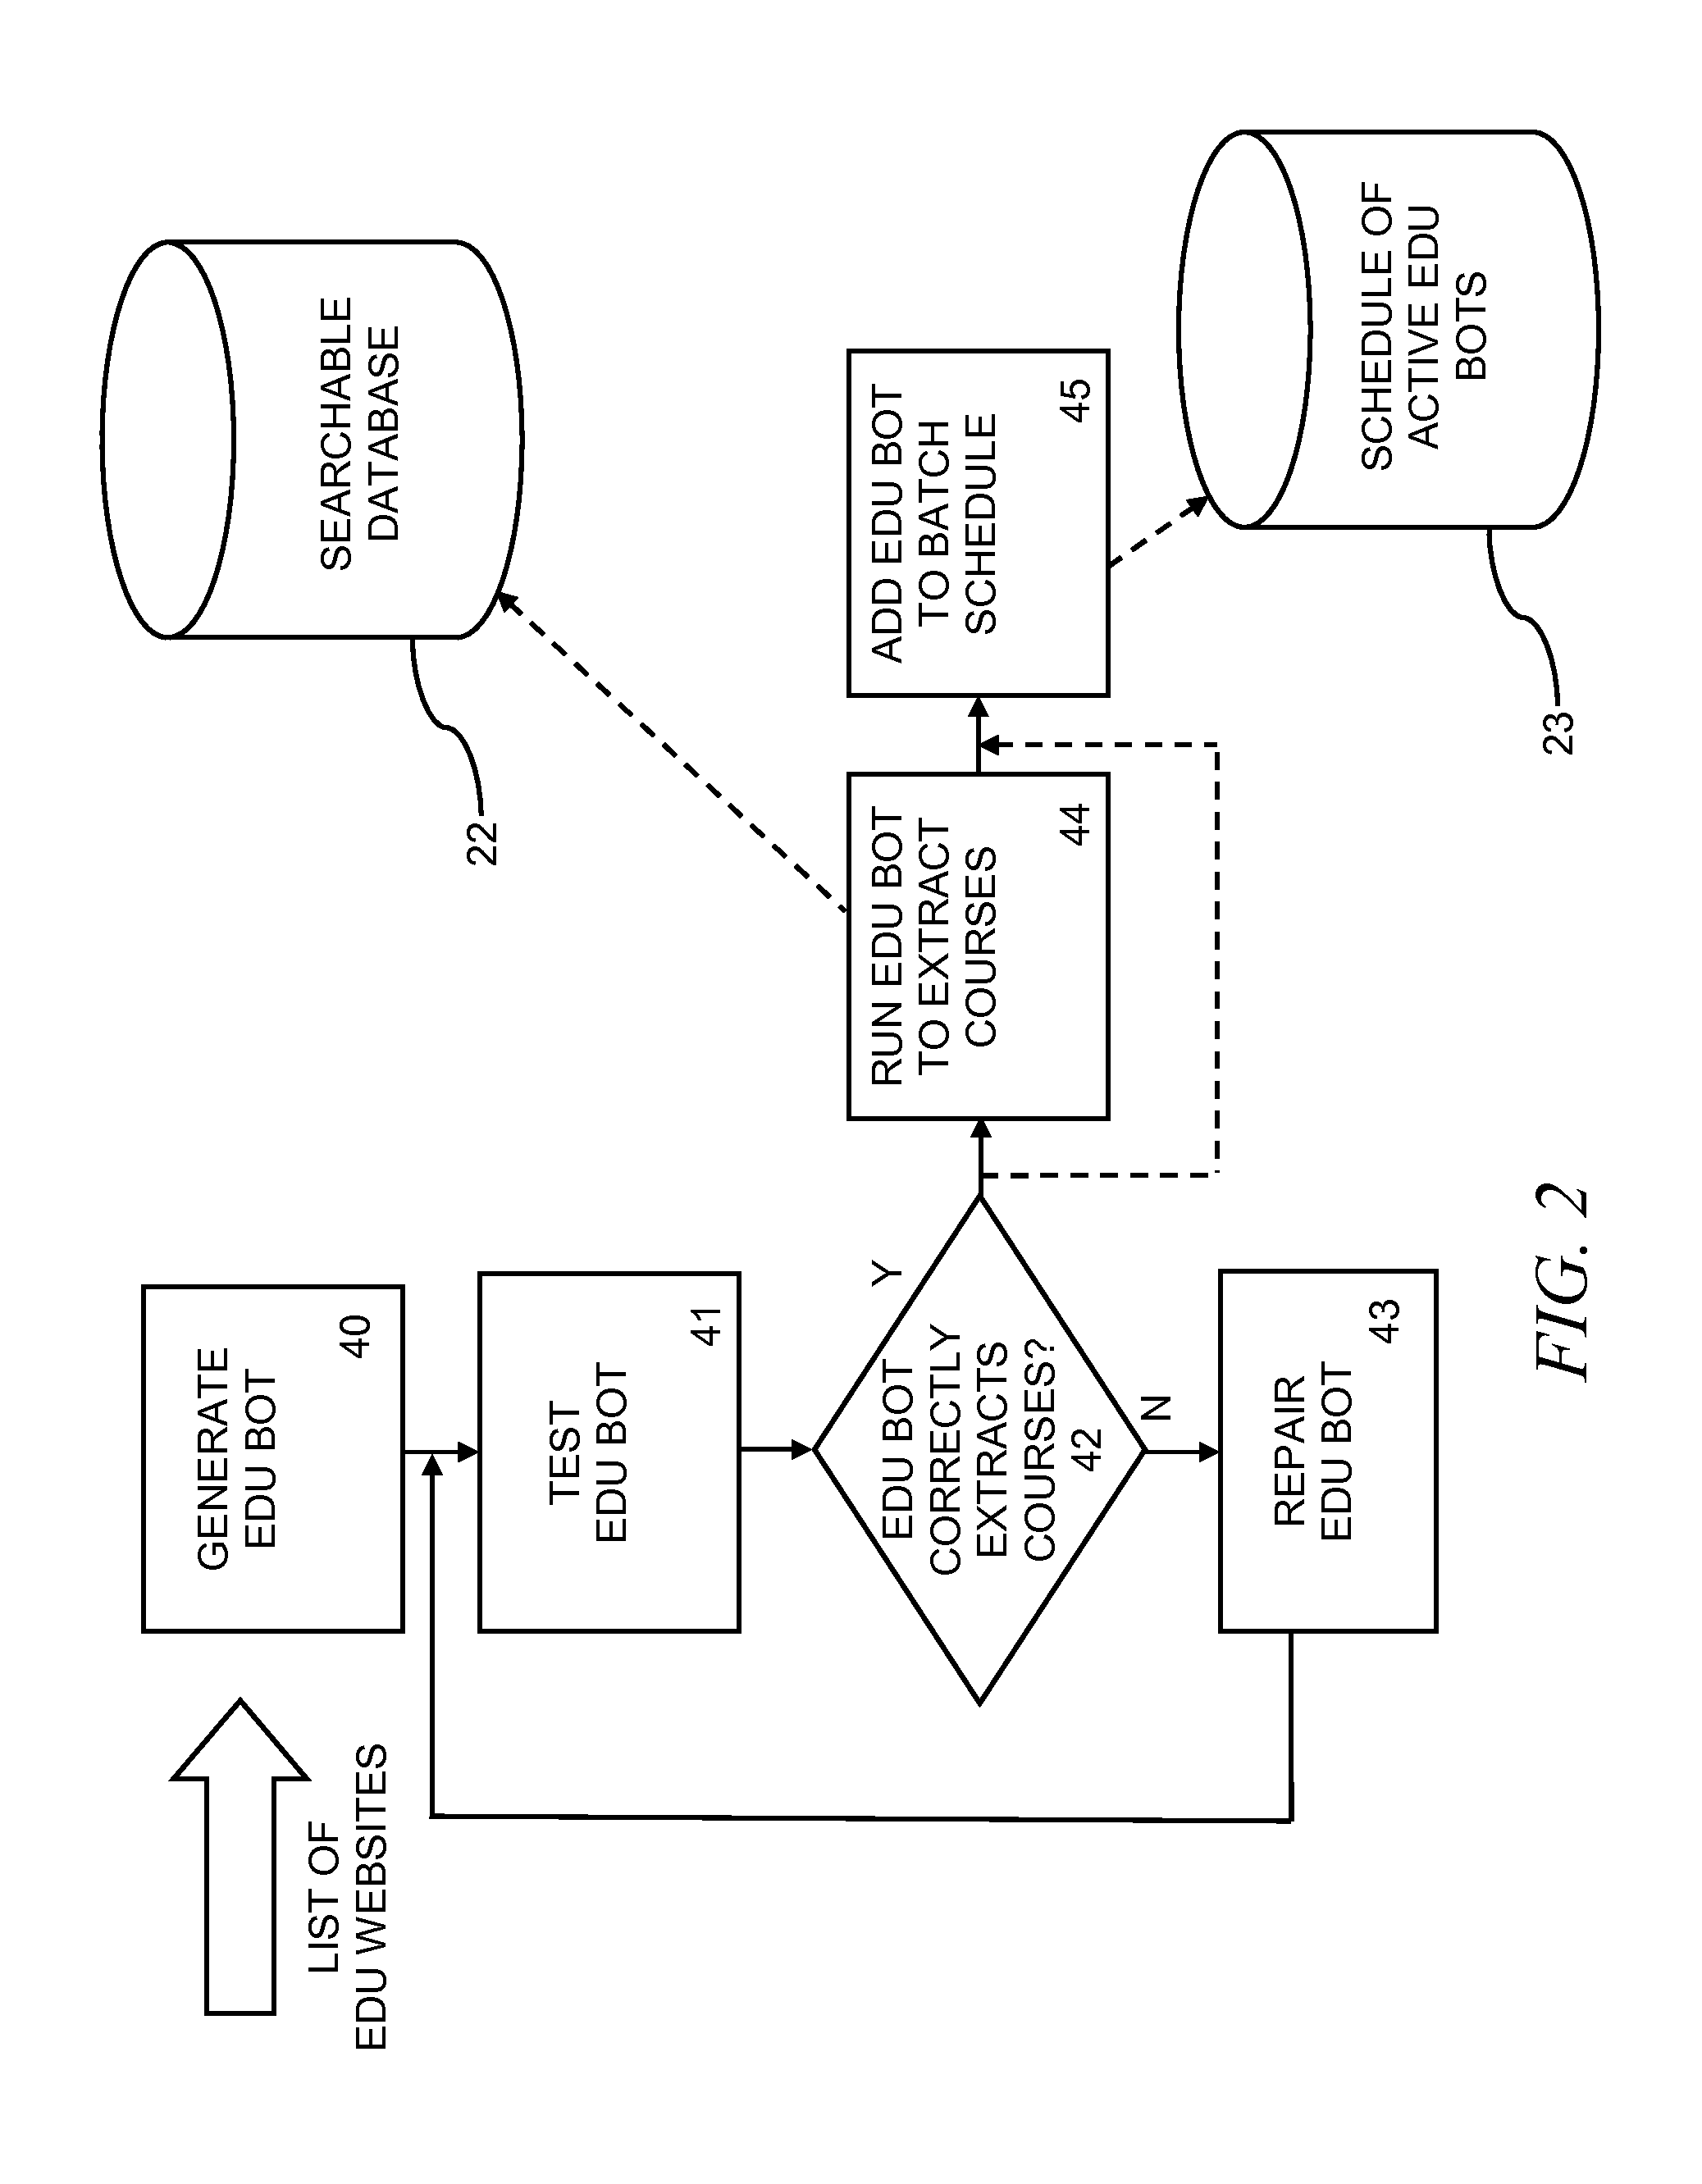 System, method and apparatus for consolidating and searching educational opportunities